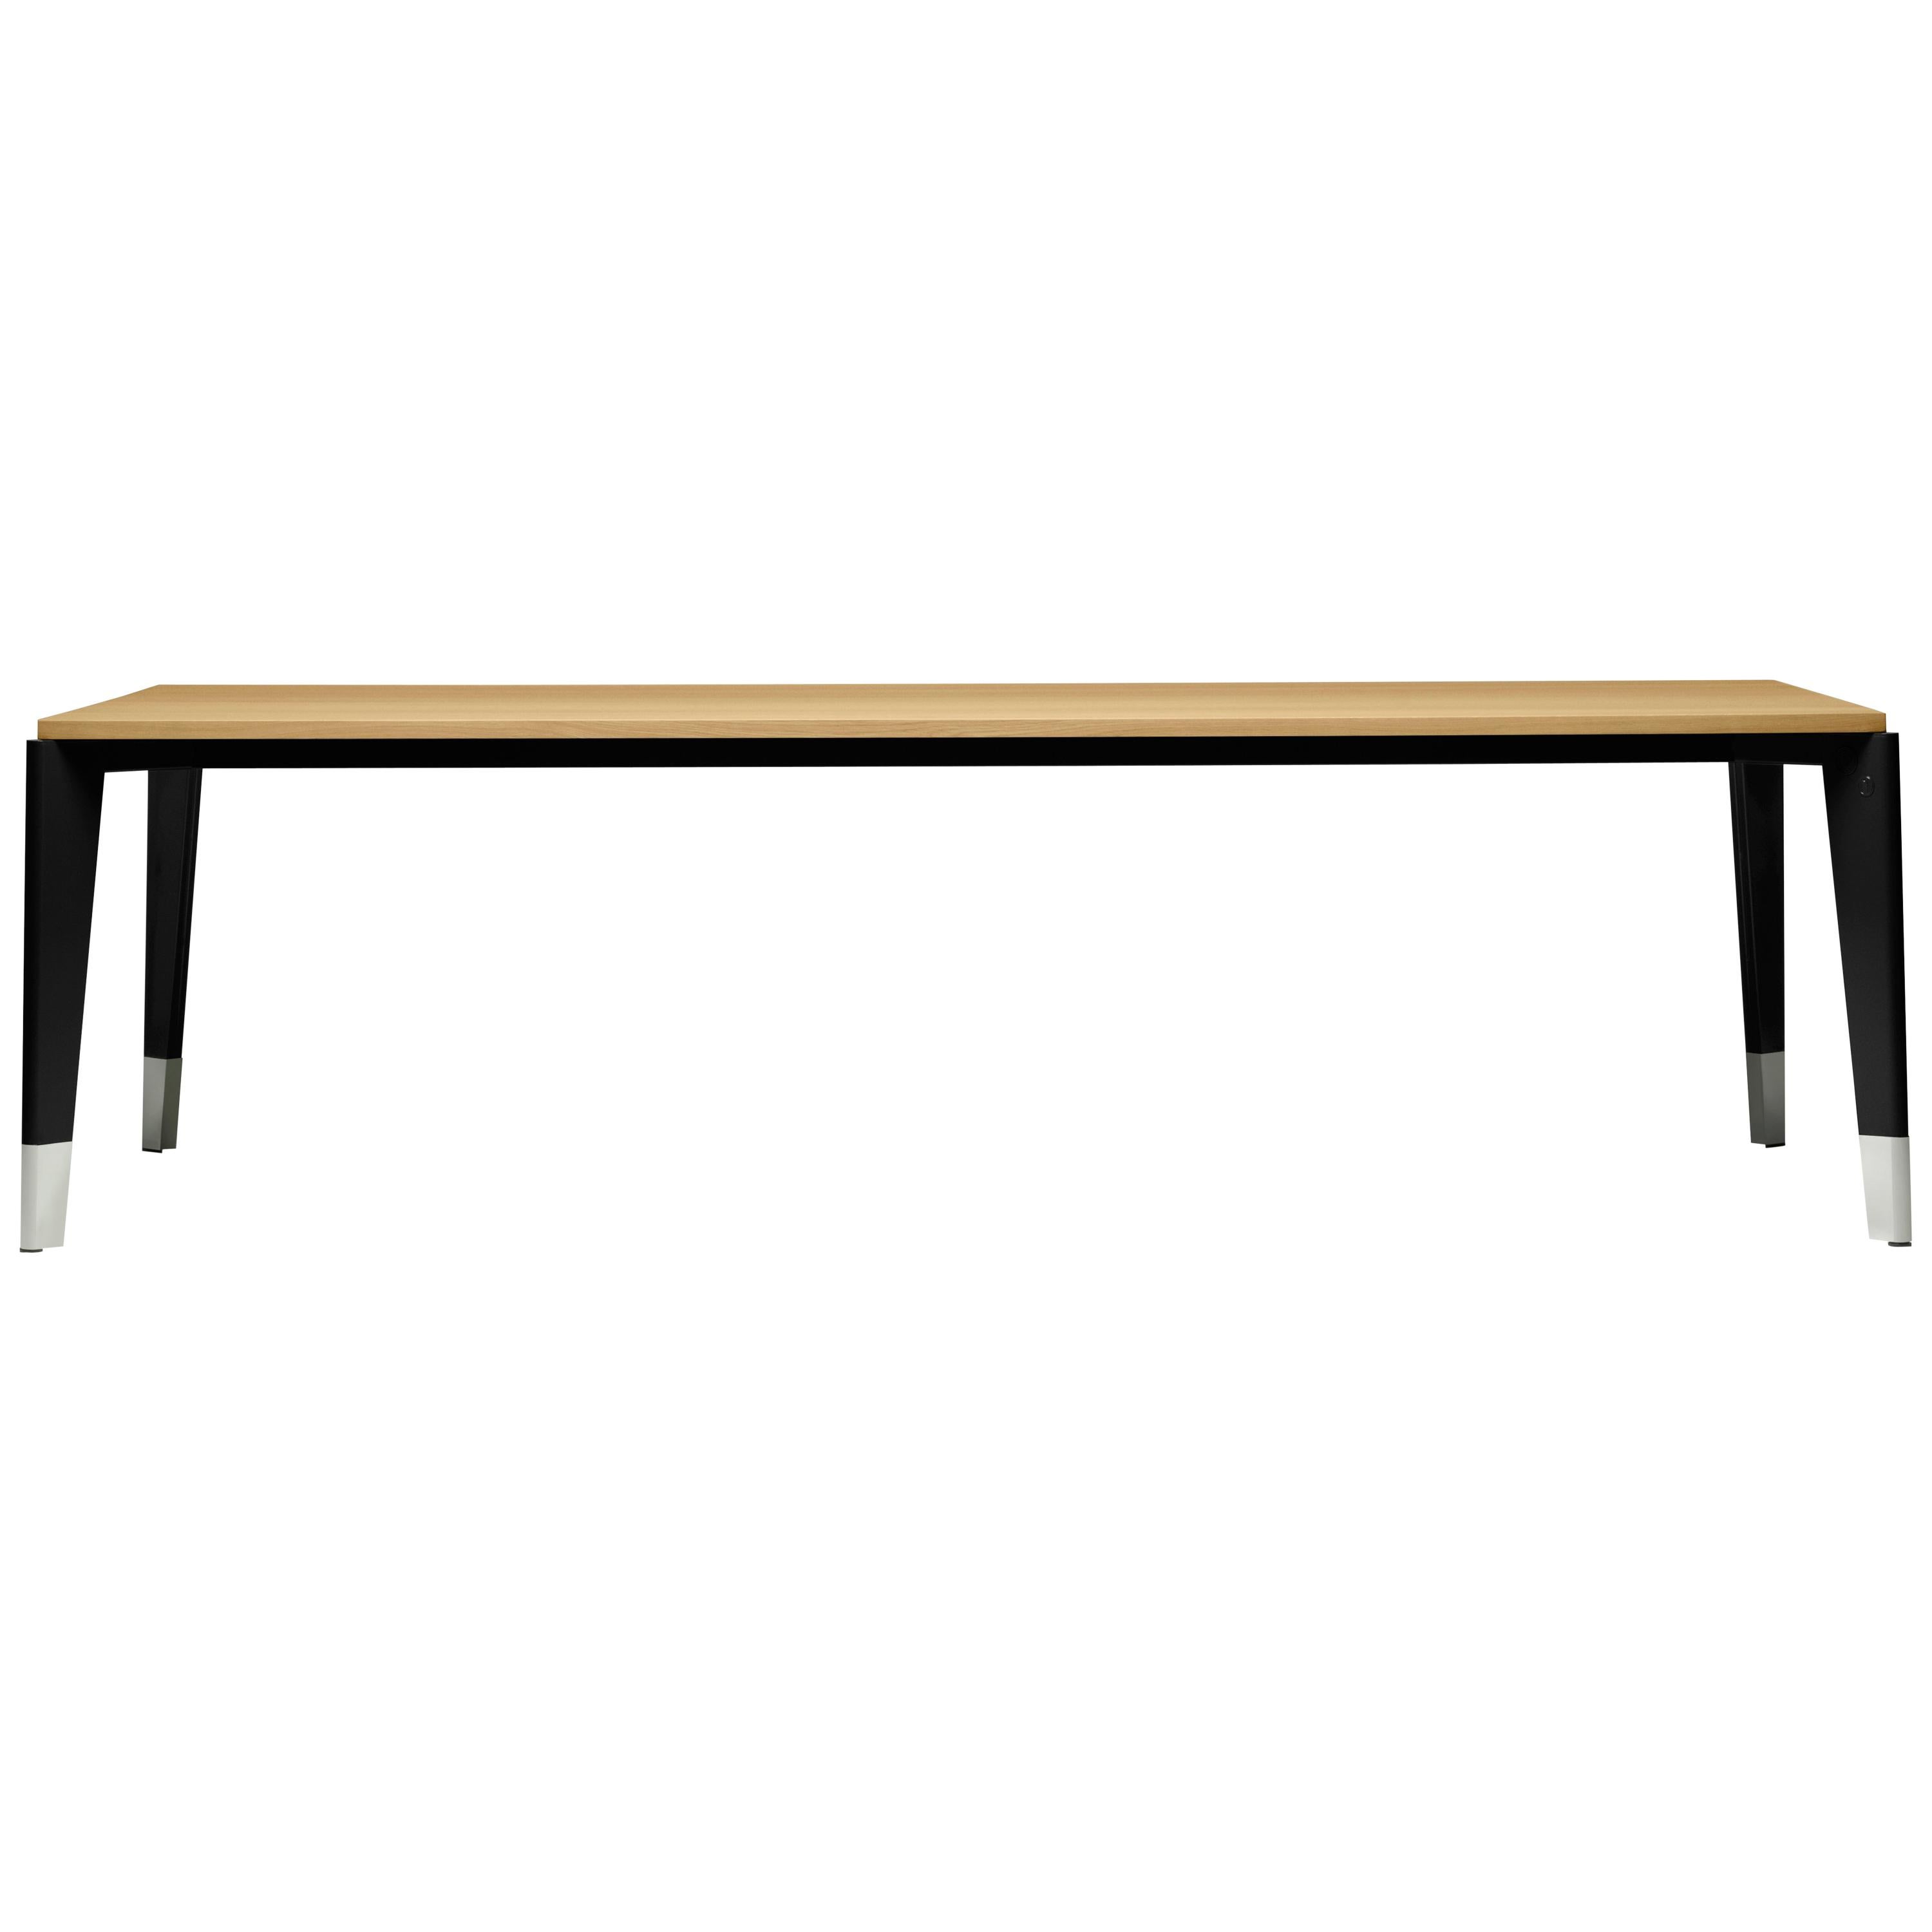 Vitra Flavigny Table in Natural Oak by Jean Prouvé For Sale